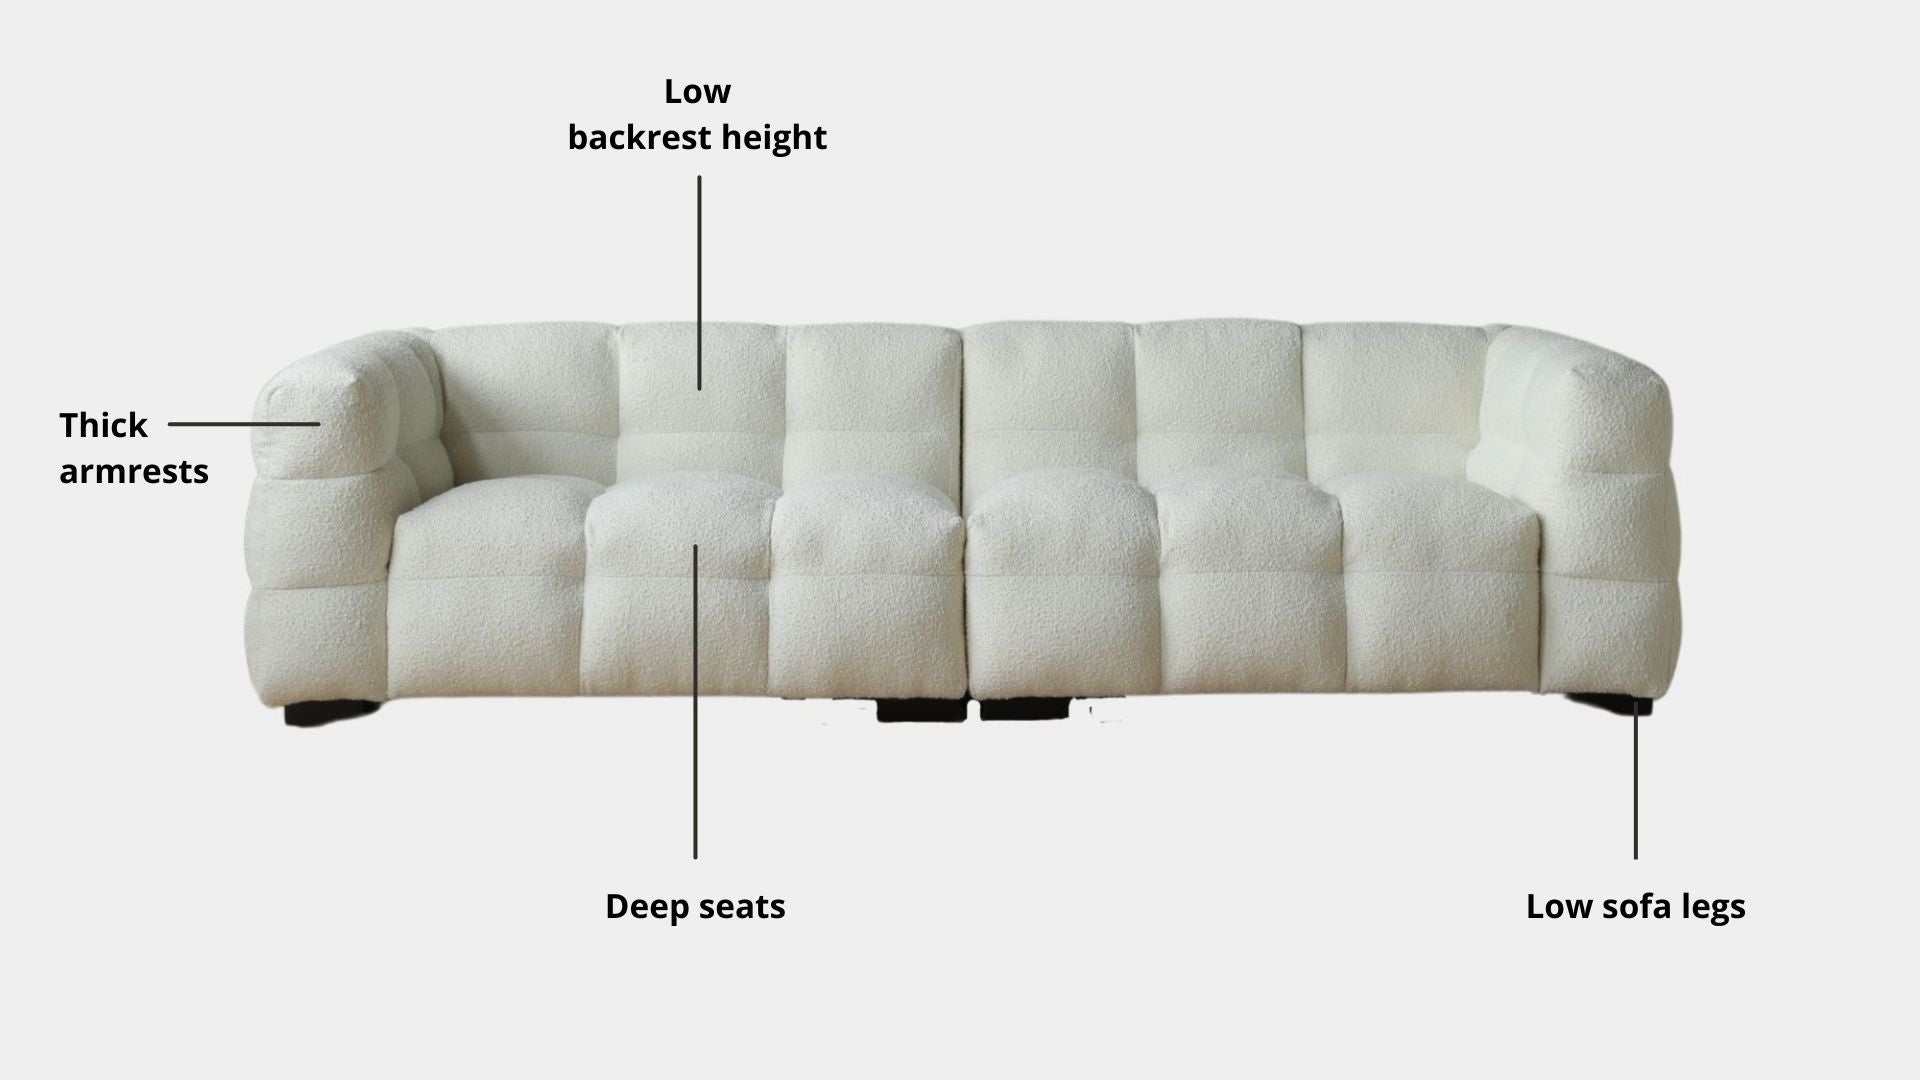 Key features such as armrest thickness, cushion height, seat depth and sofa leg height for Cutey Fabric Sofa